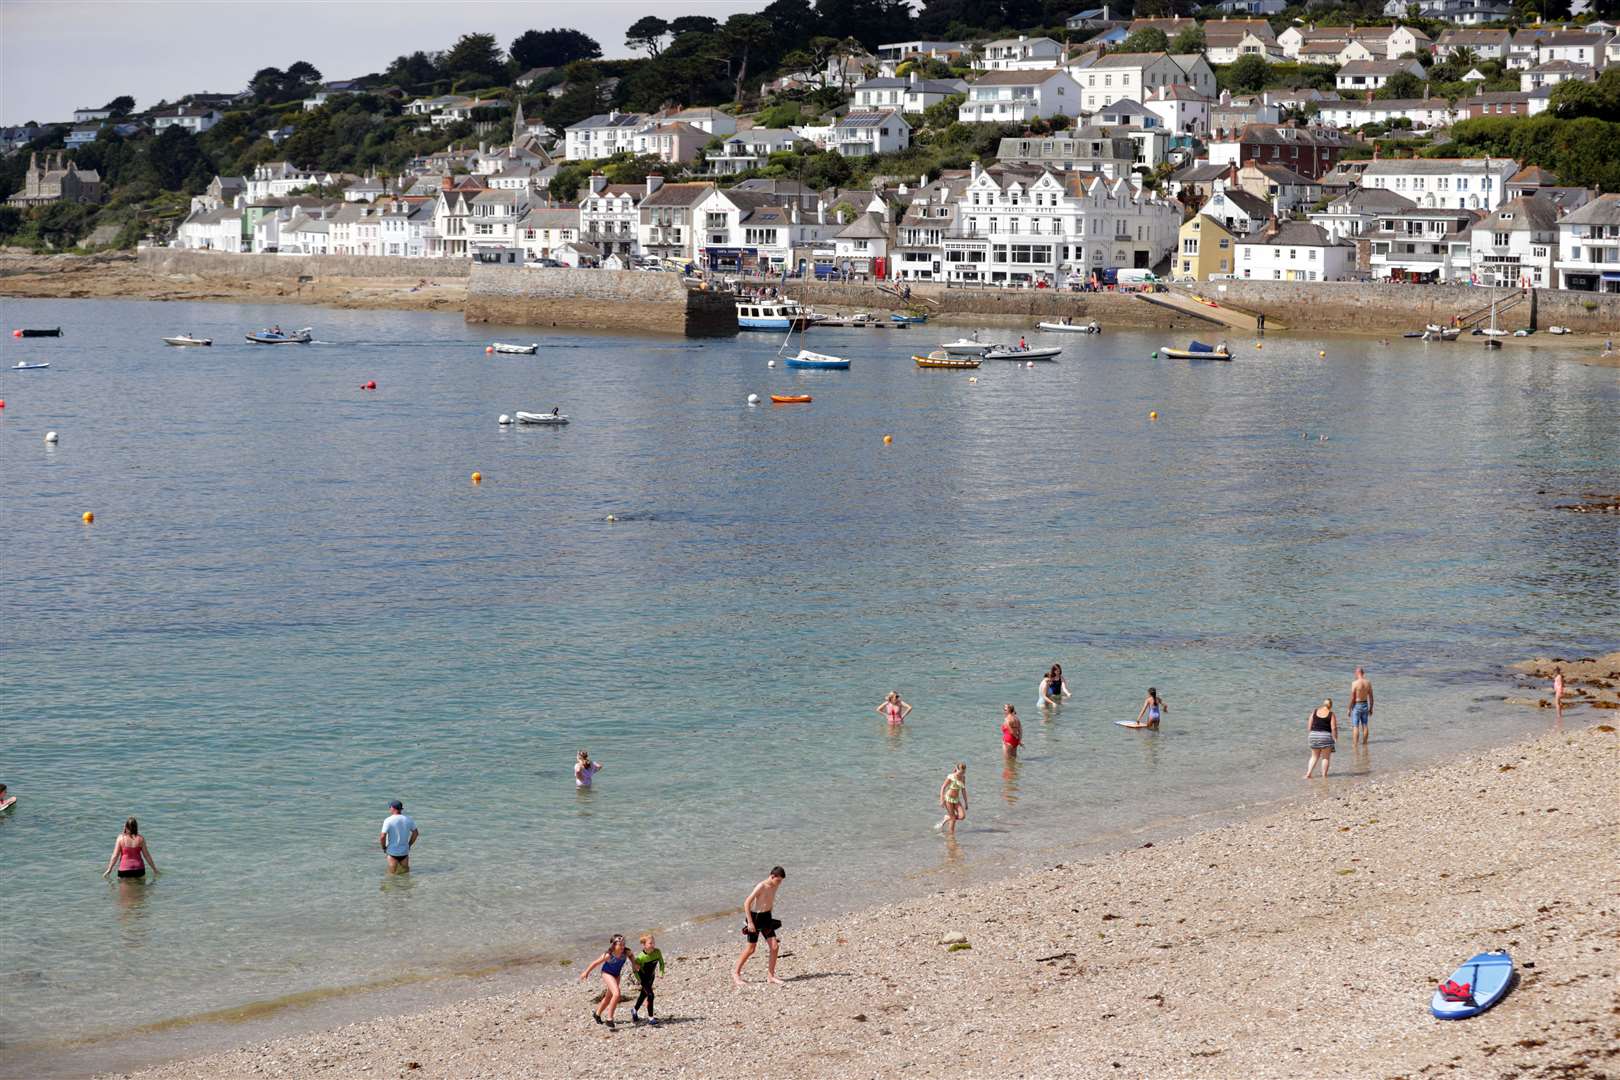 The beach at St Mawes in Cornwall over the summer (David Davies/PA)